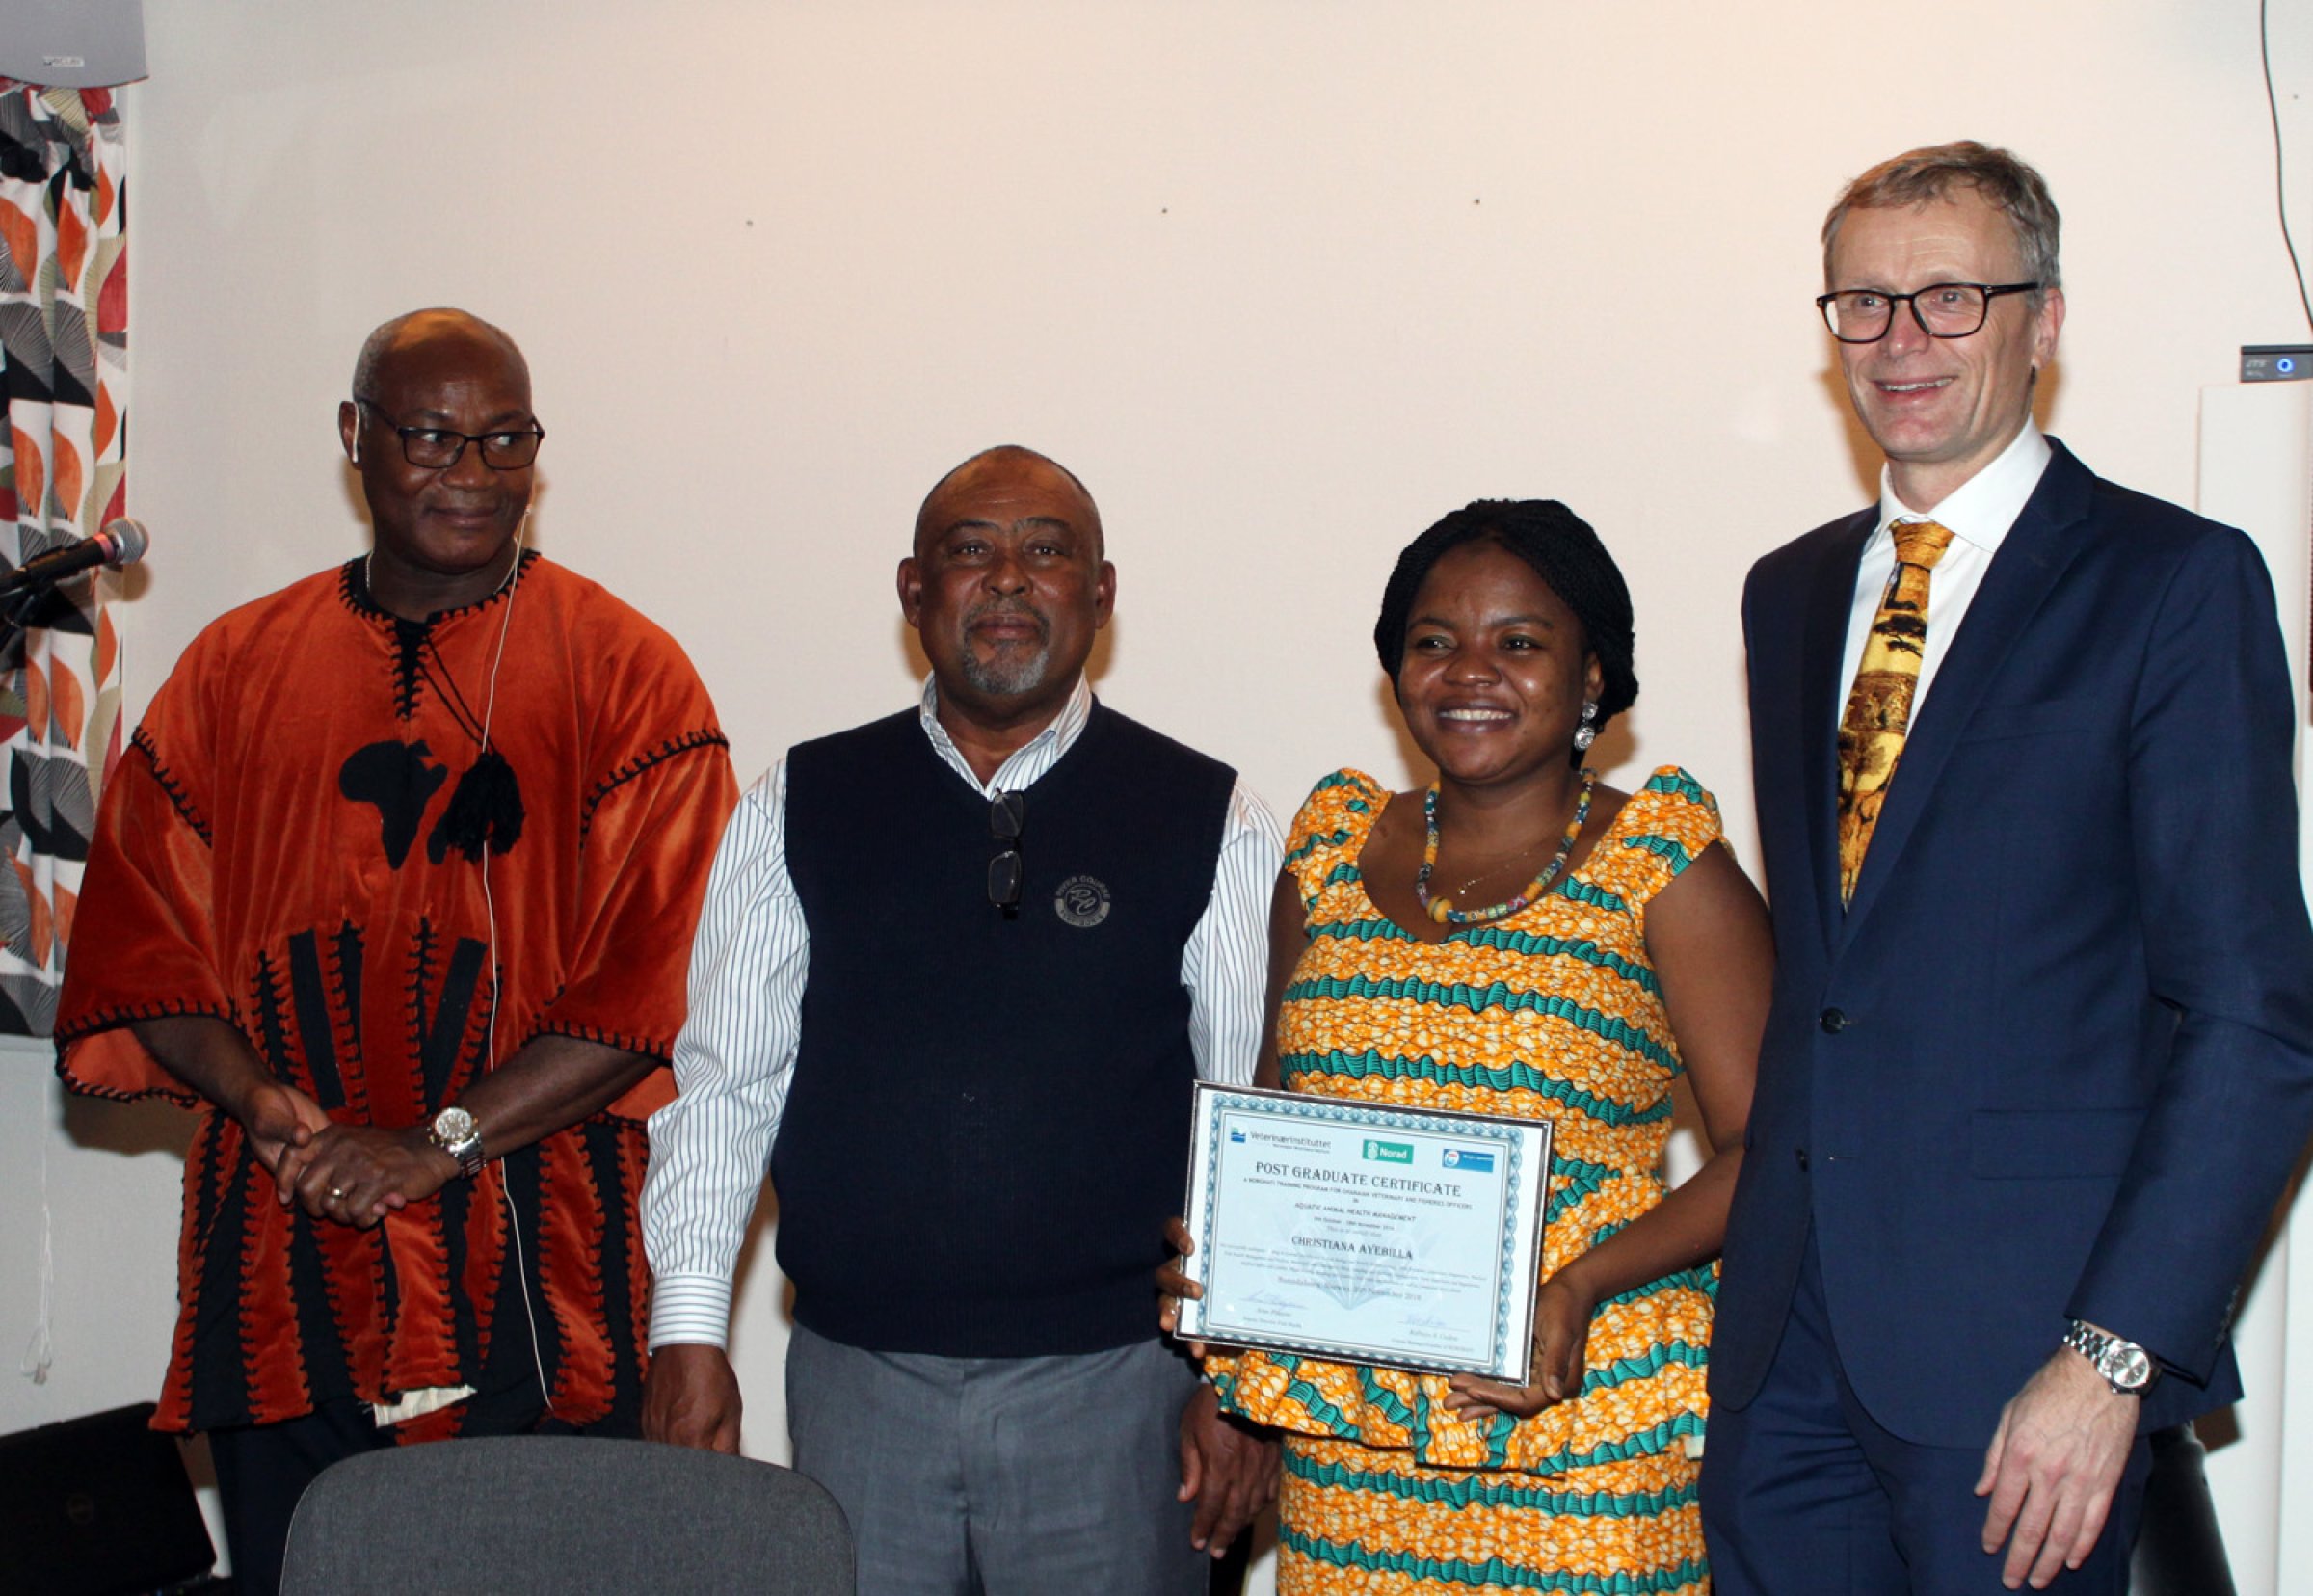 The training ended with the issuance of post graduate certificates in aquatic animal health. From left: leader of the NORGHATI cooperation Dr Kofitsyo Cudjoe from the Norwegian Veterinary Institute, The Director of Fish Health from Ghana’s Fishery Commission, Dr Peter Ziddah, Christiana Ayebilla and the Deputy Director of Fish Health at the Norwegian Veterinary Institute, Dr Arne Flåøyen.